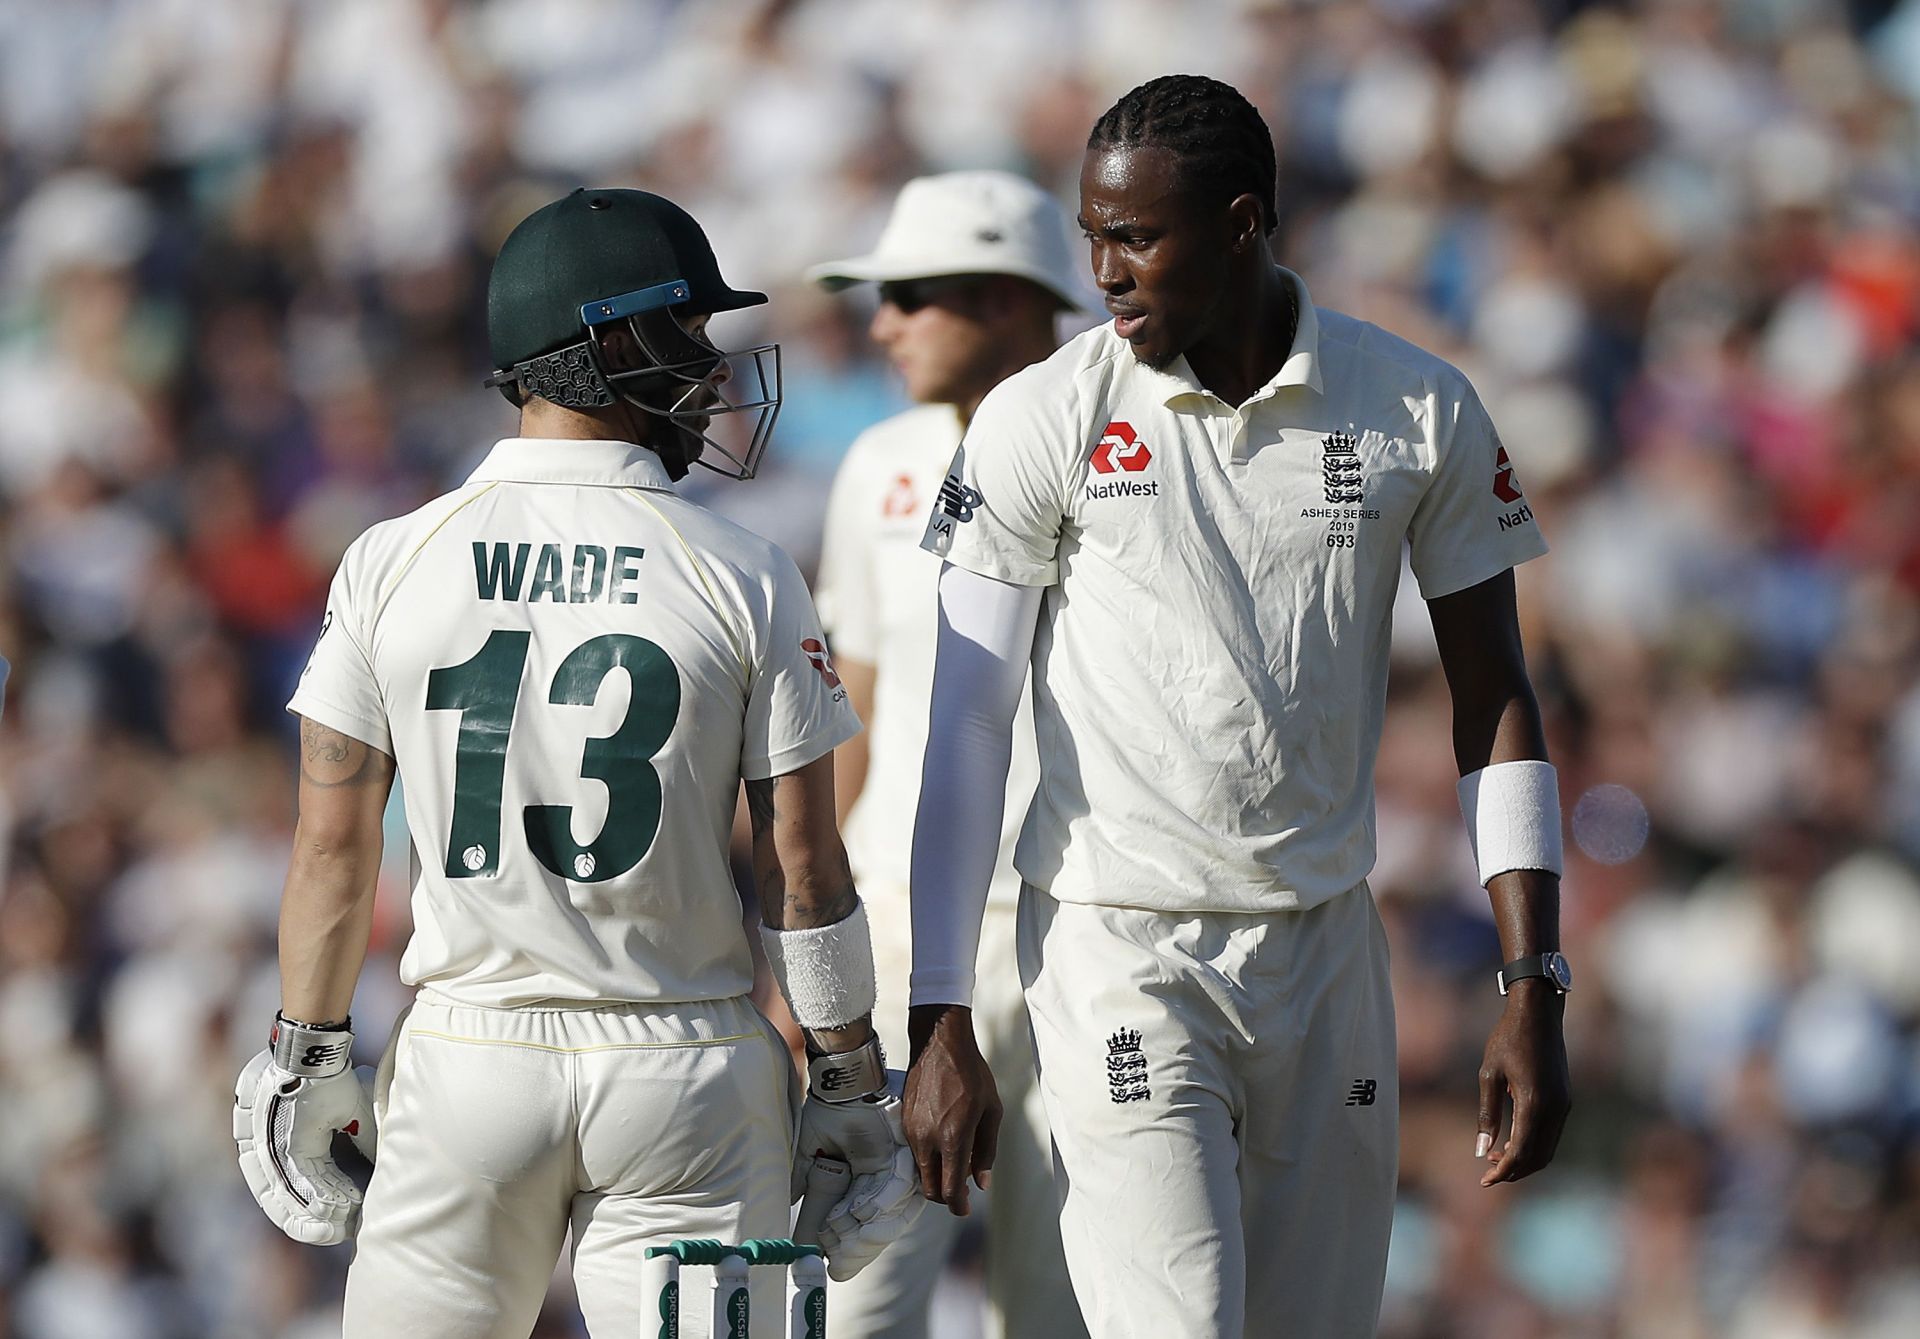 Matthew Wade (left) and Jofra Archer exchange words during day four of the 5th Ashes Test in 2019. (Pic: Getty Images)